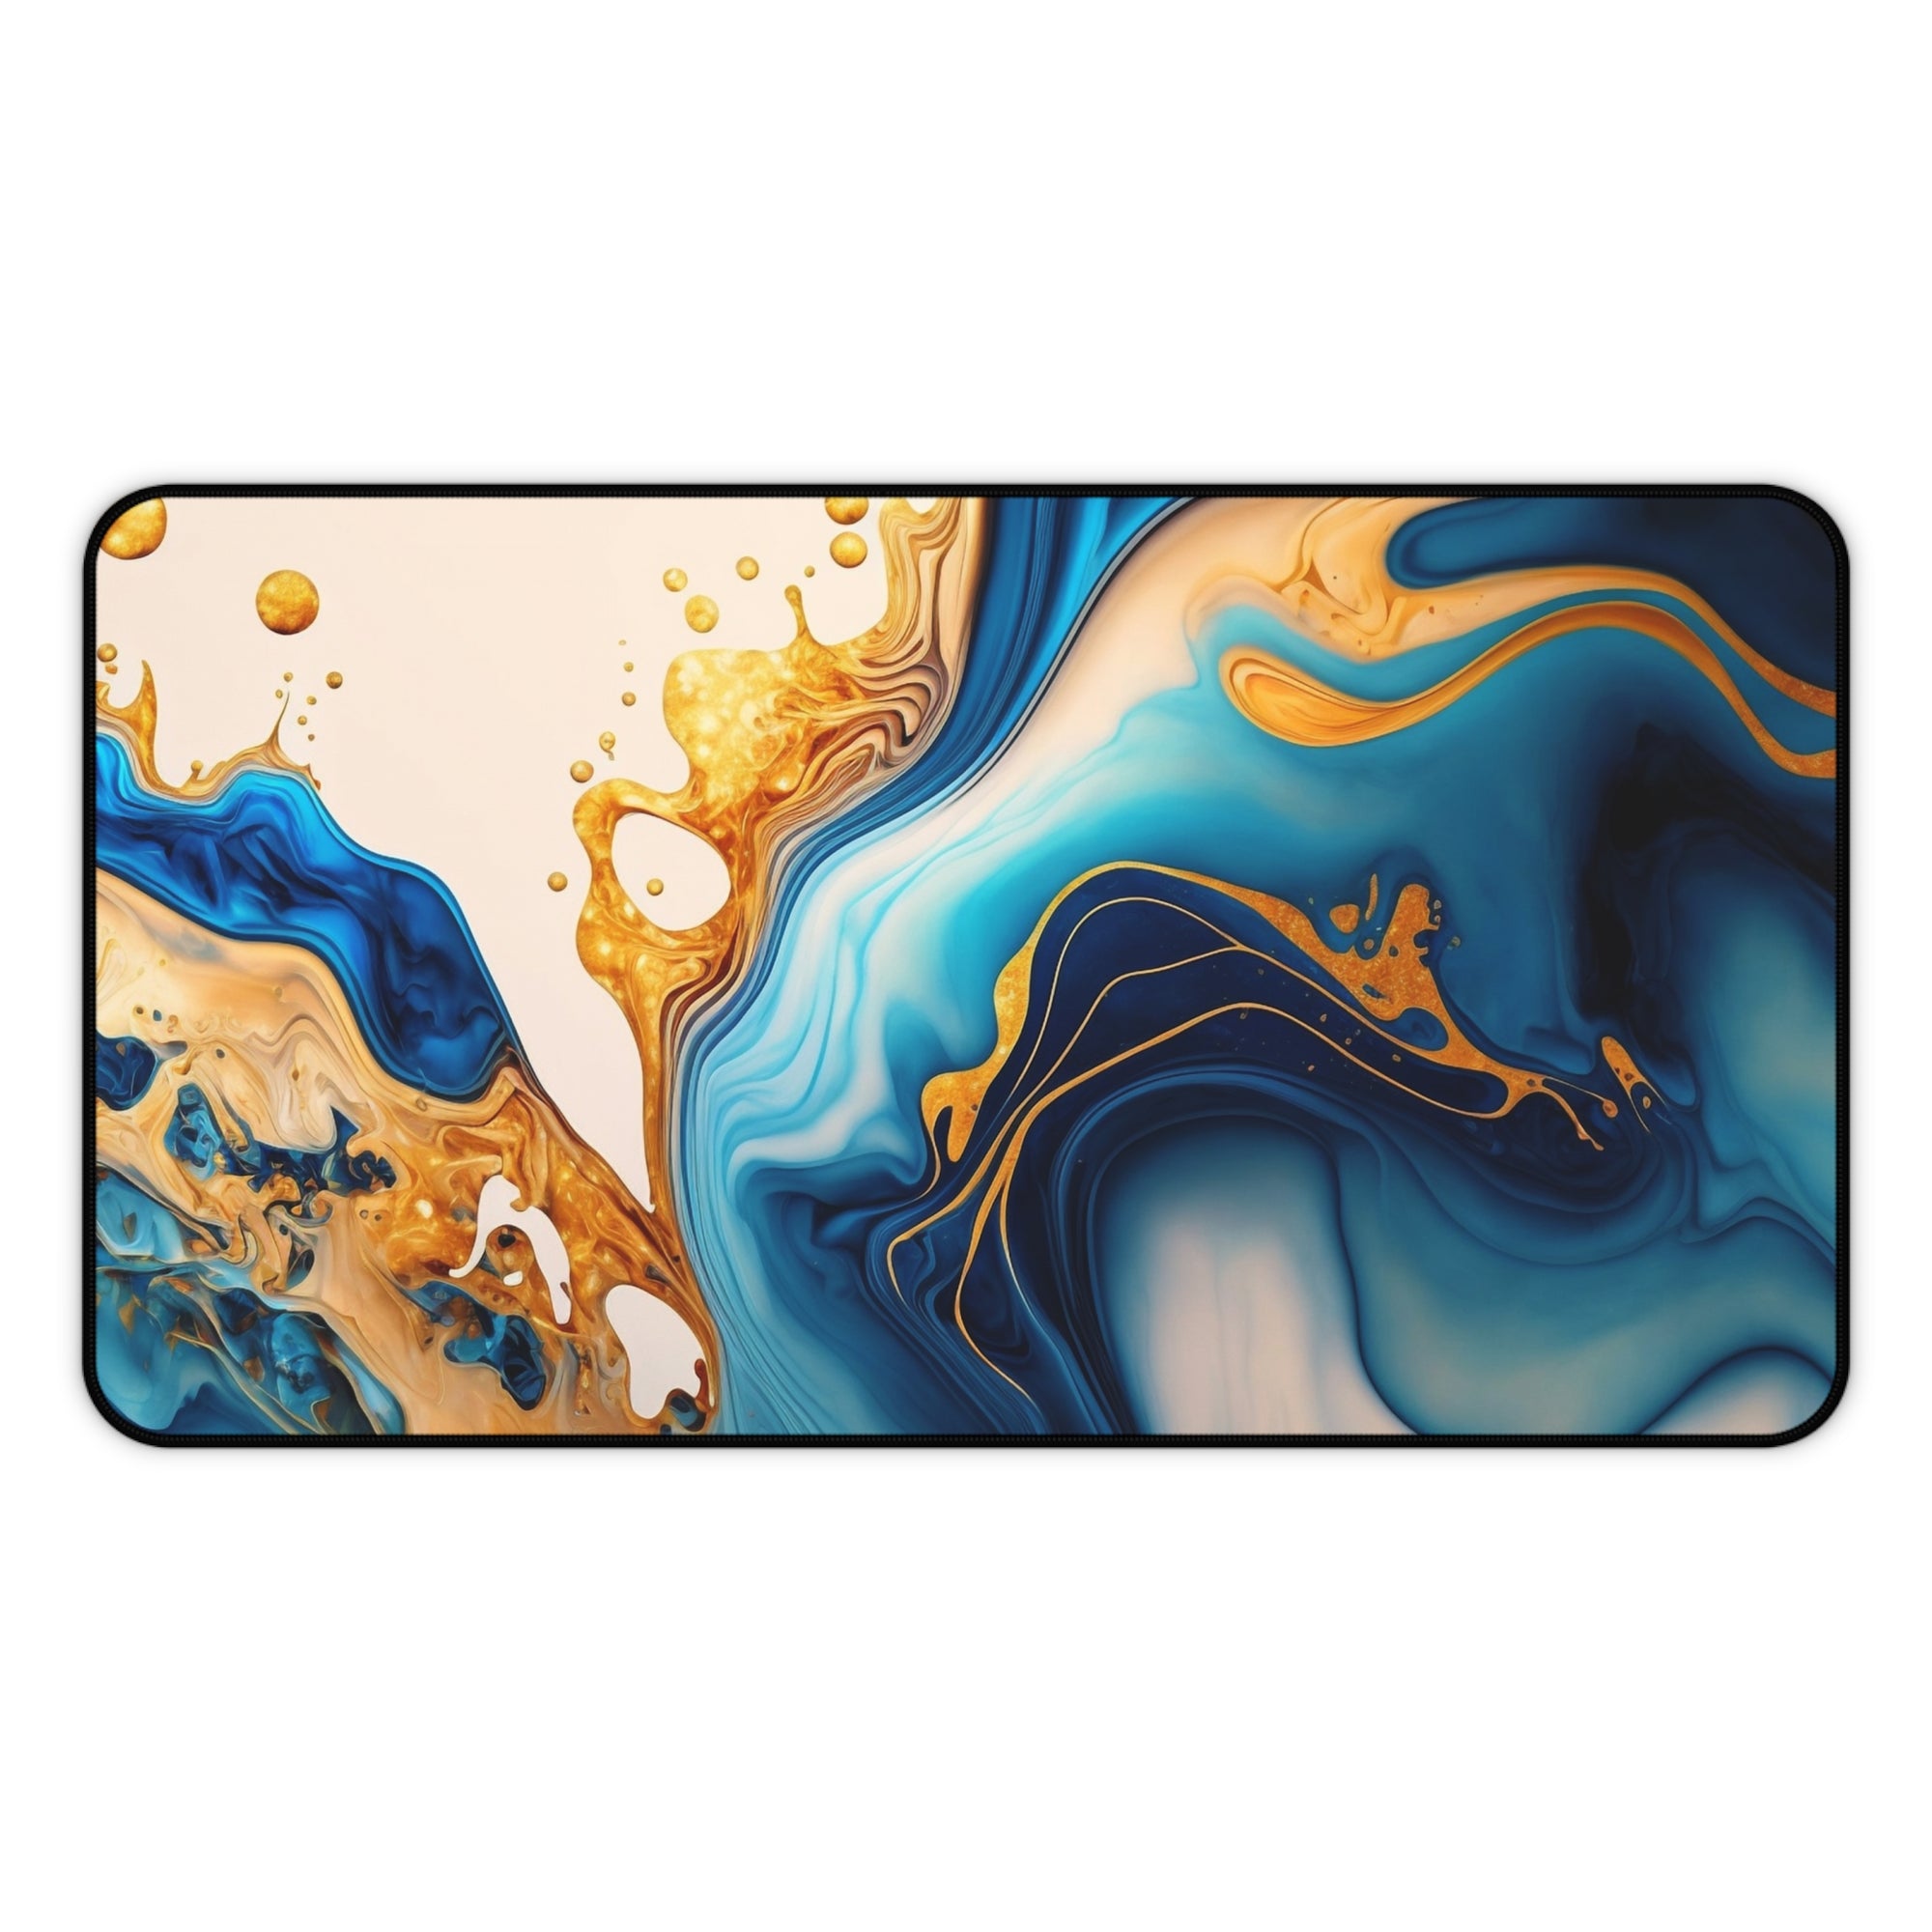 Desk mat Blue, yellow and gold marble design